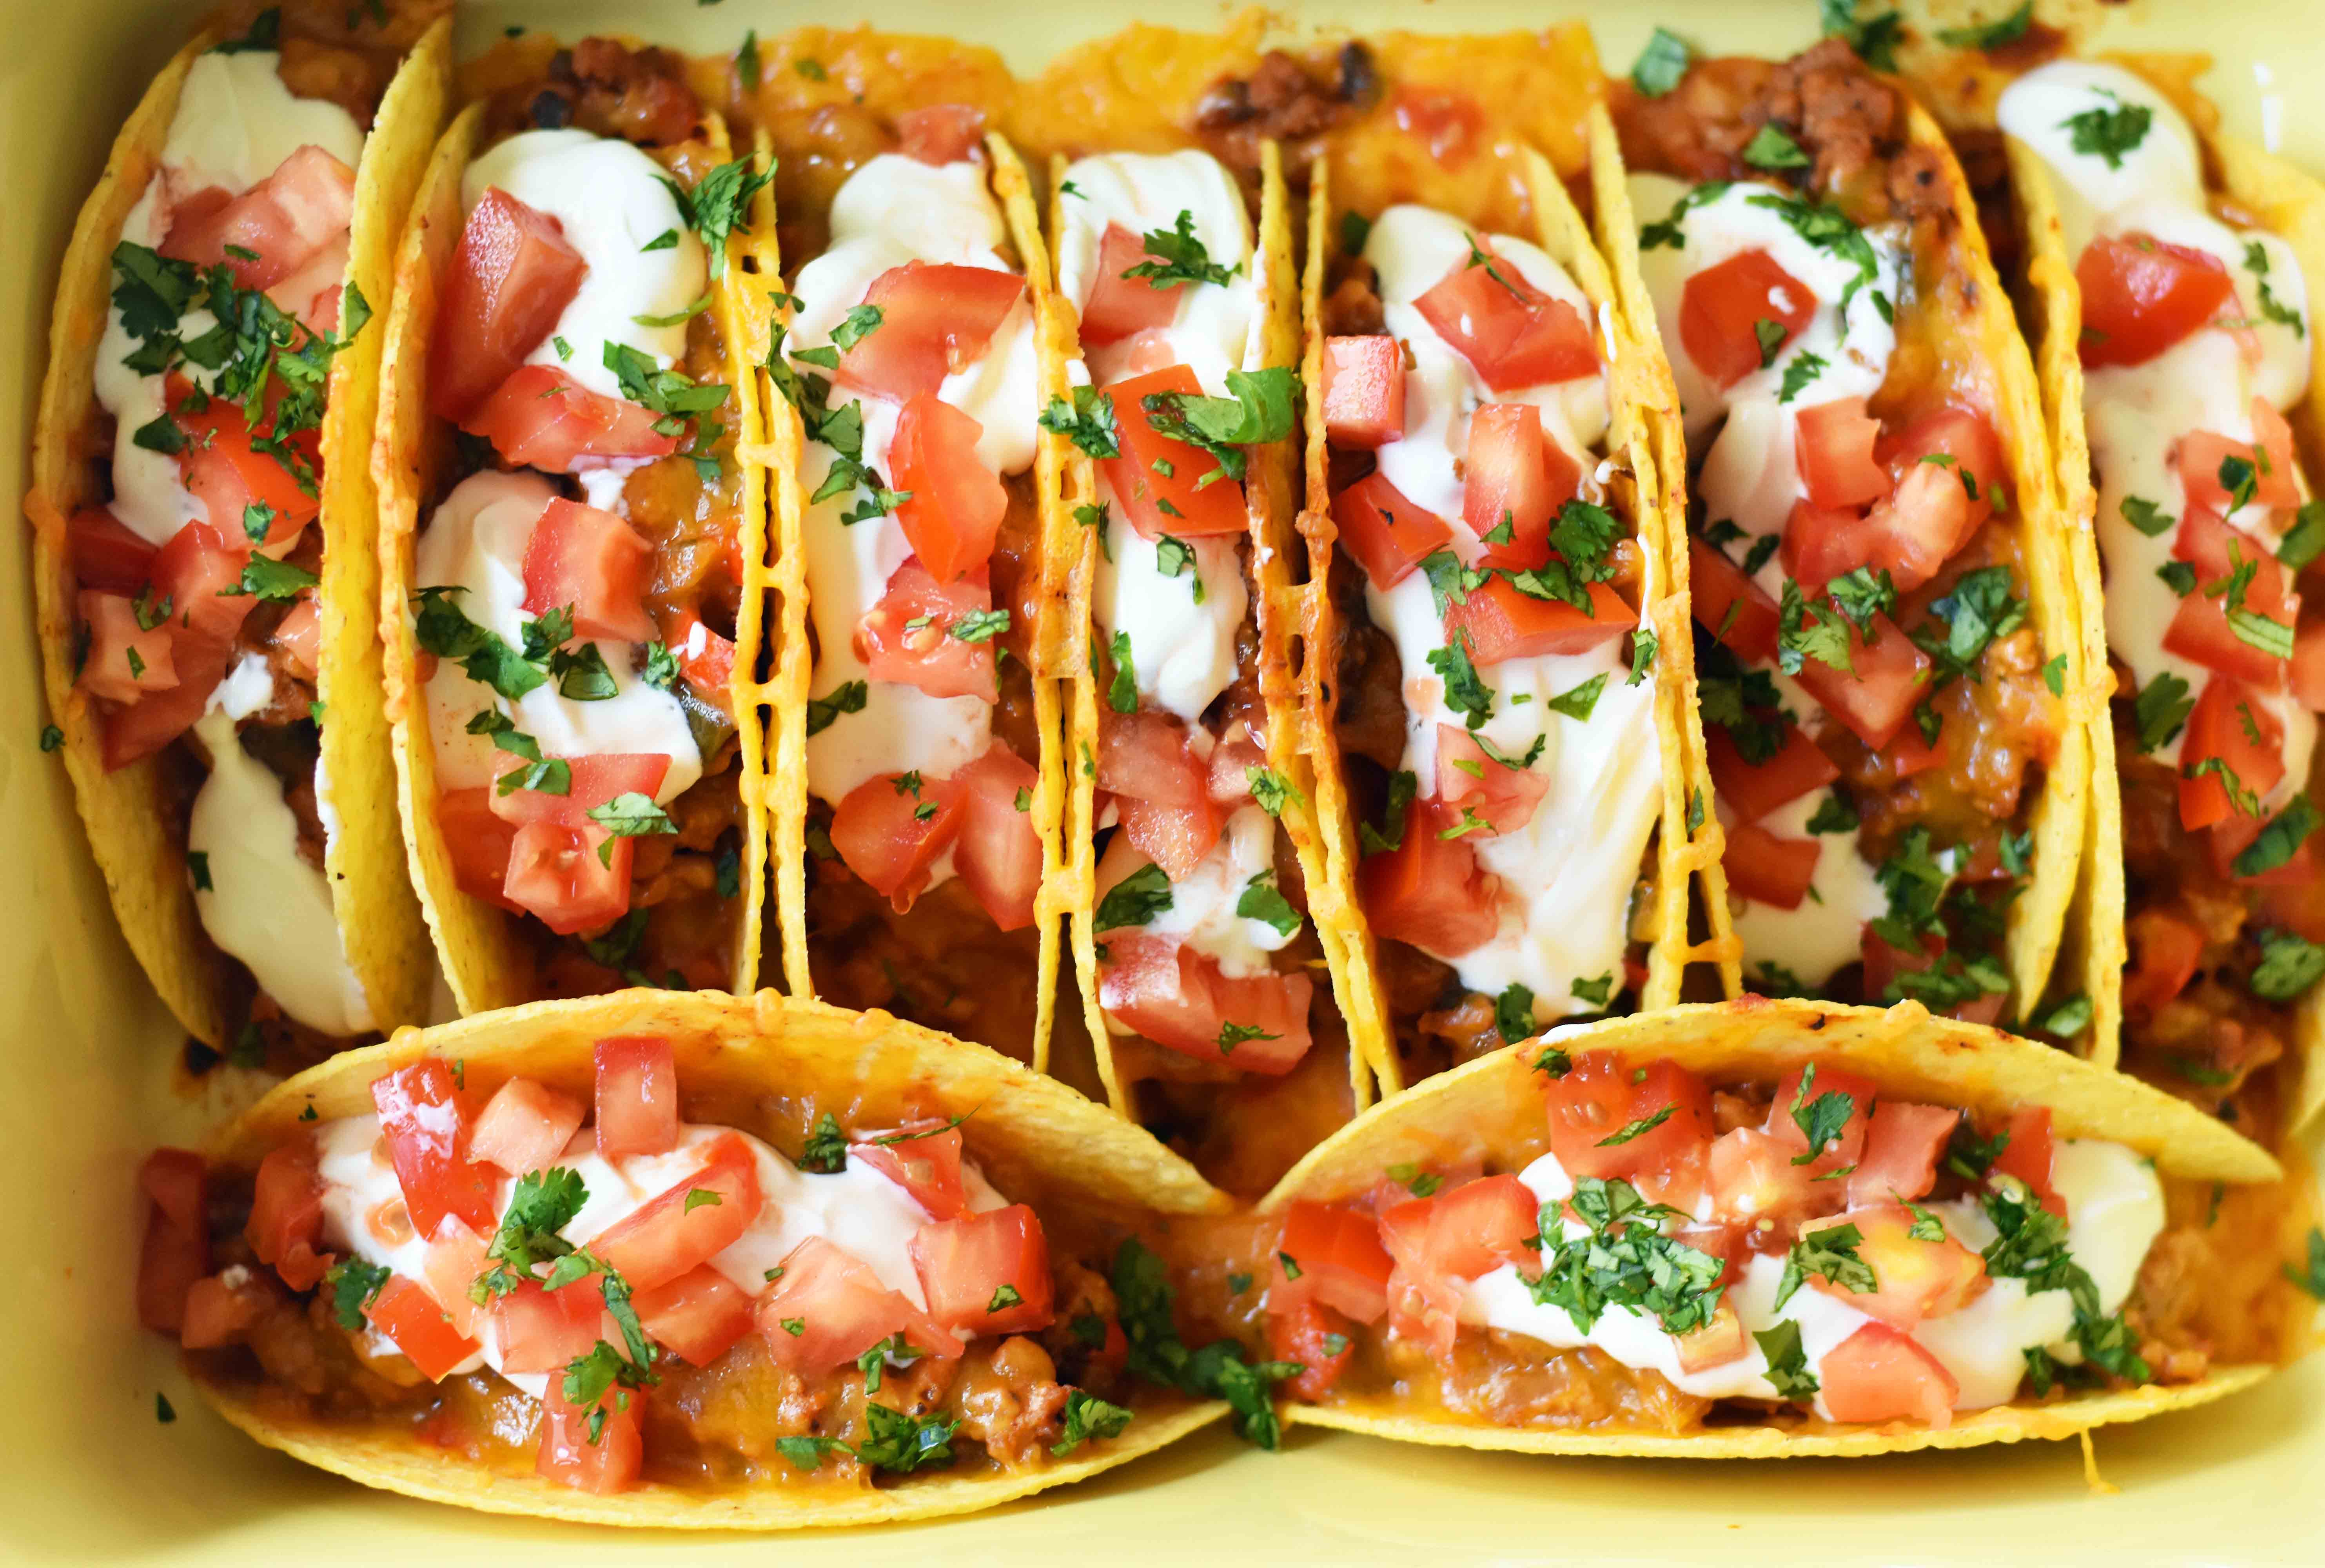 Easy Oven Baked Beef Tacos. Perfectly seasoned ground beef tacos and Mexican cheese baked in taco shells until melted. Topped with sour cream, guacamole, salsa, diced tomatoes, and hot sauce. These are party tacos and a family favorite dinner. www.modernhoney.com